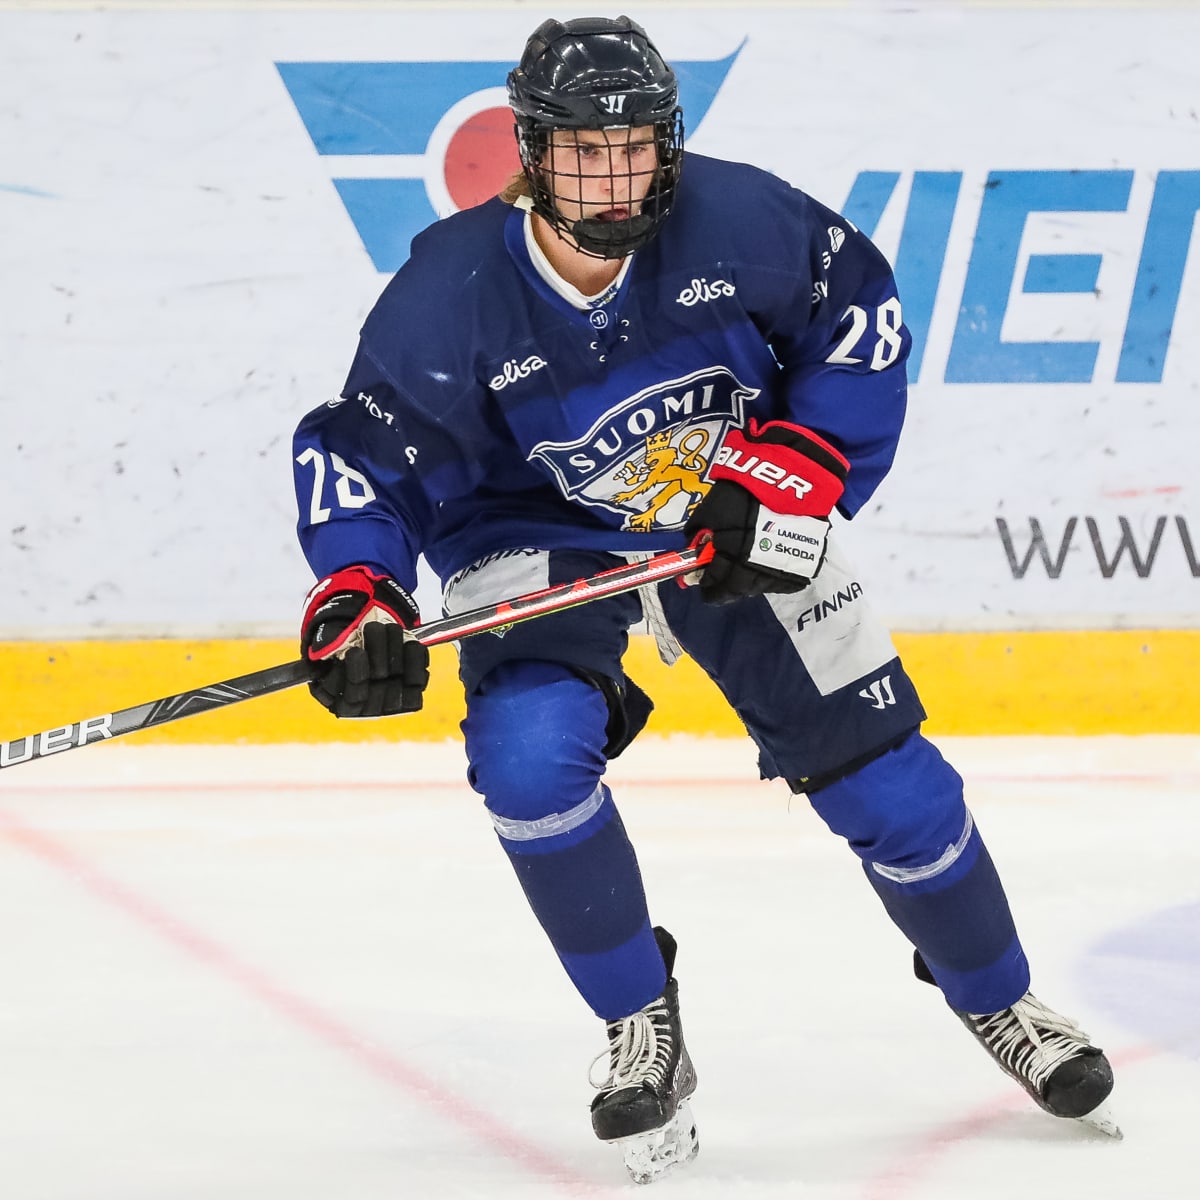 Fischer, Chartier and Young Included on NHL Central Scouting